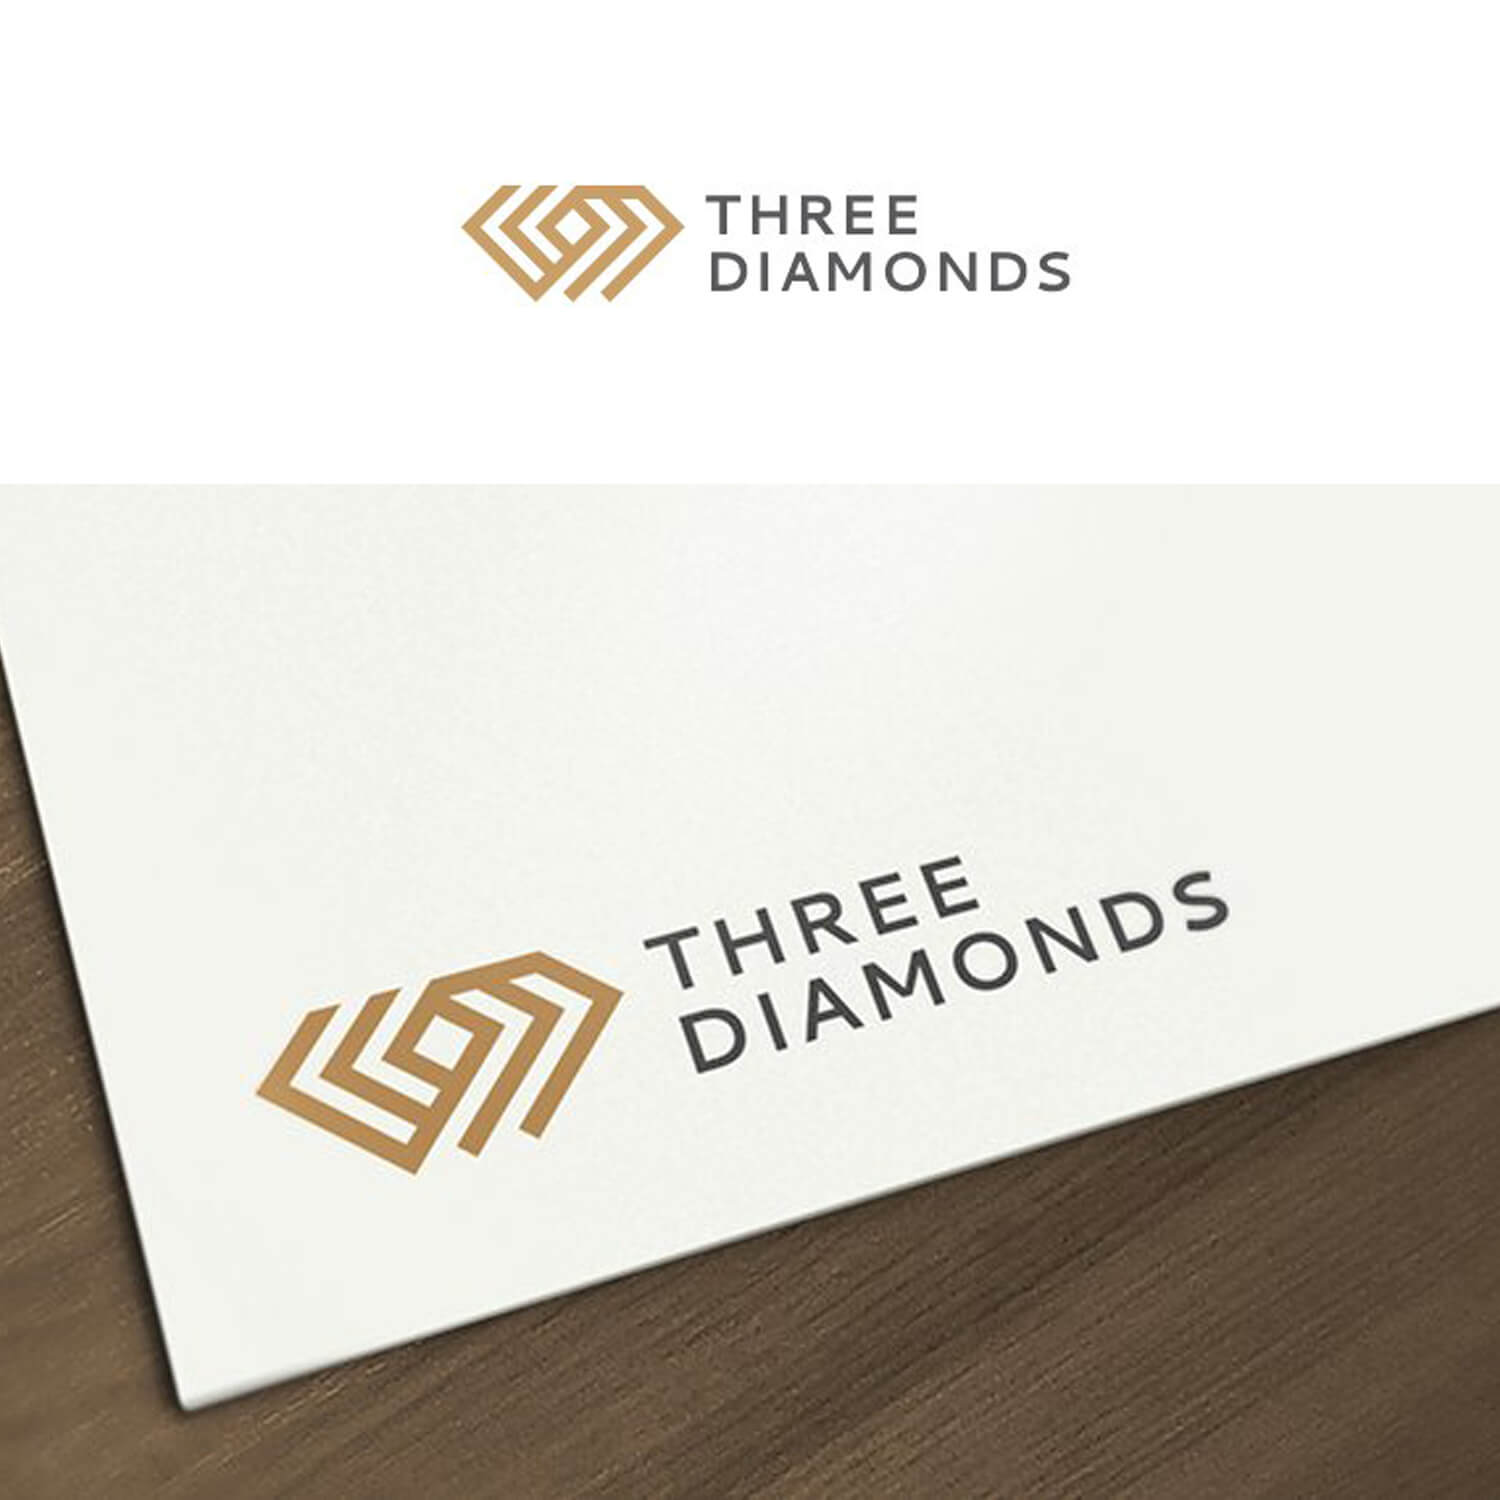 Triple golden diamond with the title on the right on a white background.